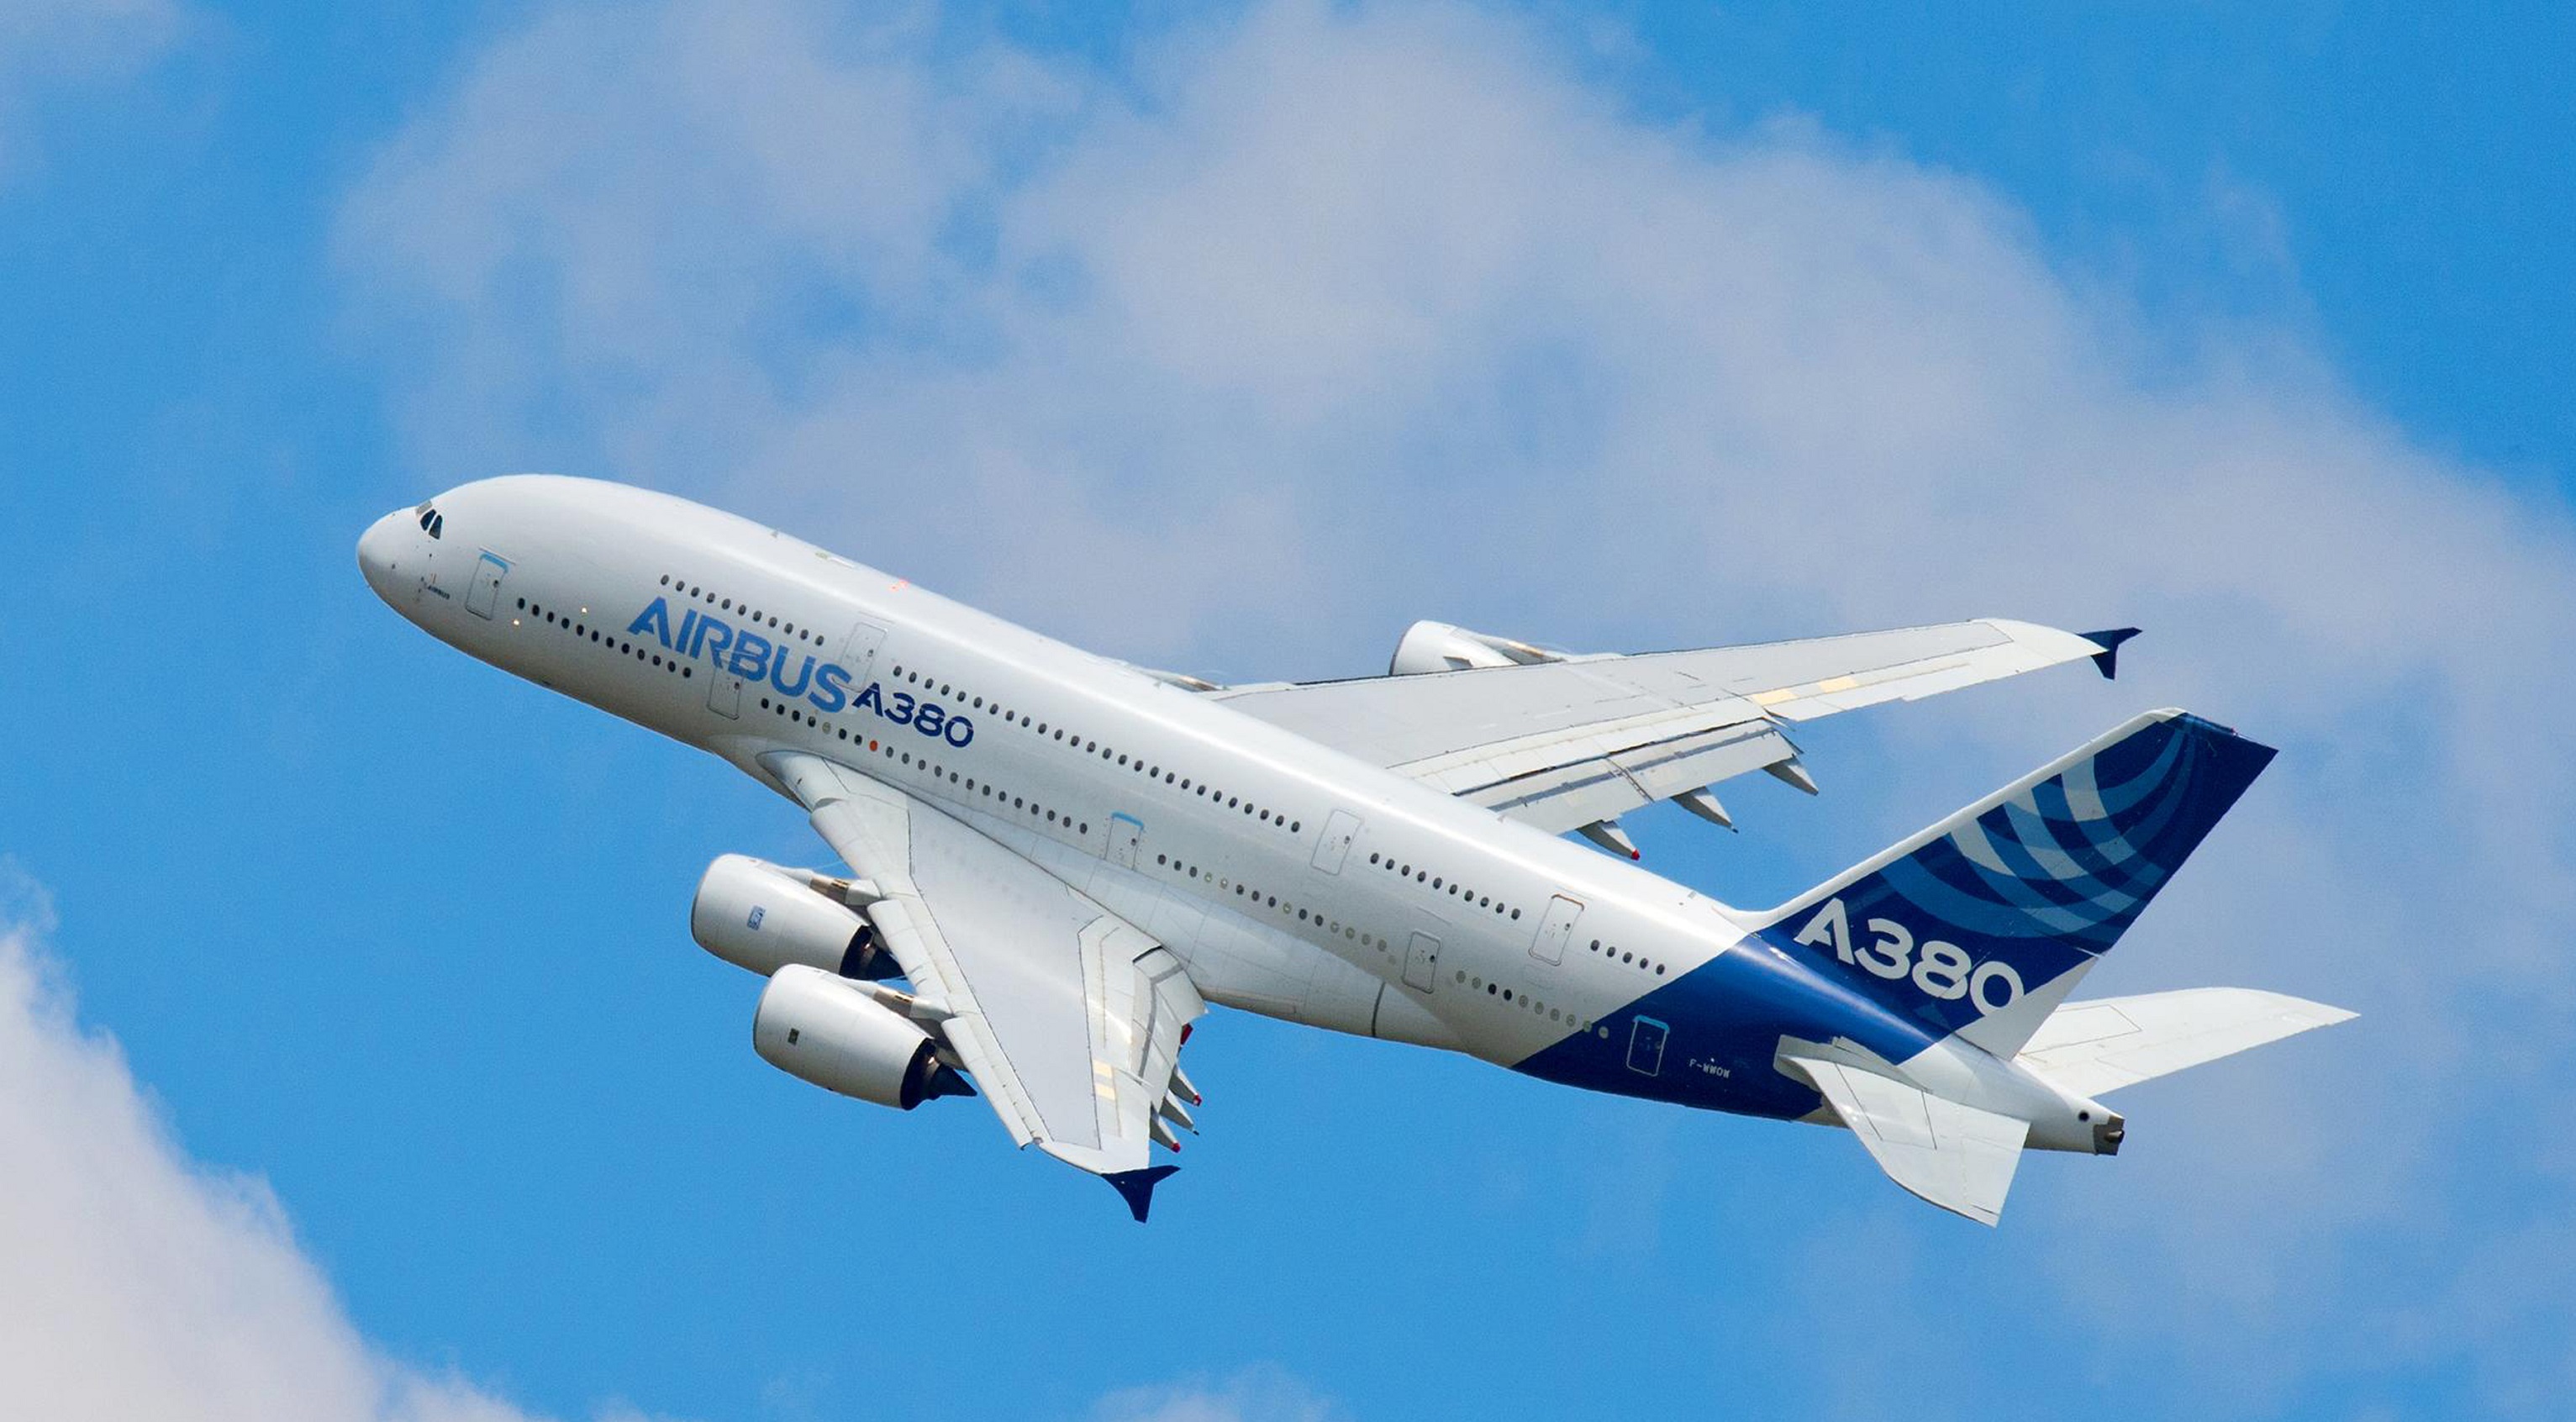 My Daily Kona: The Early Death of the Airbus A380